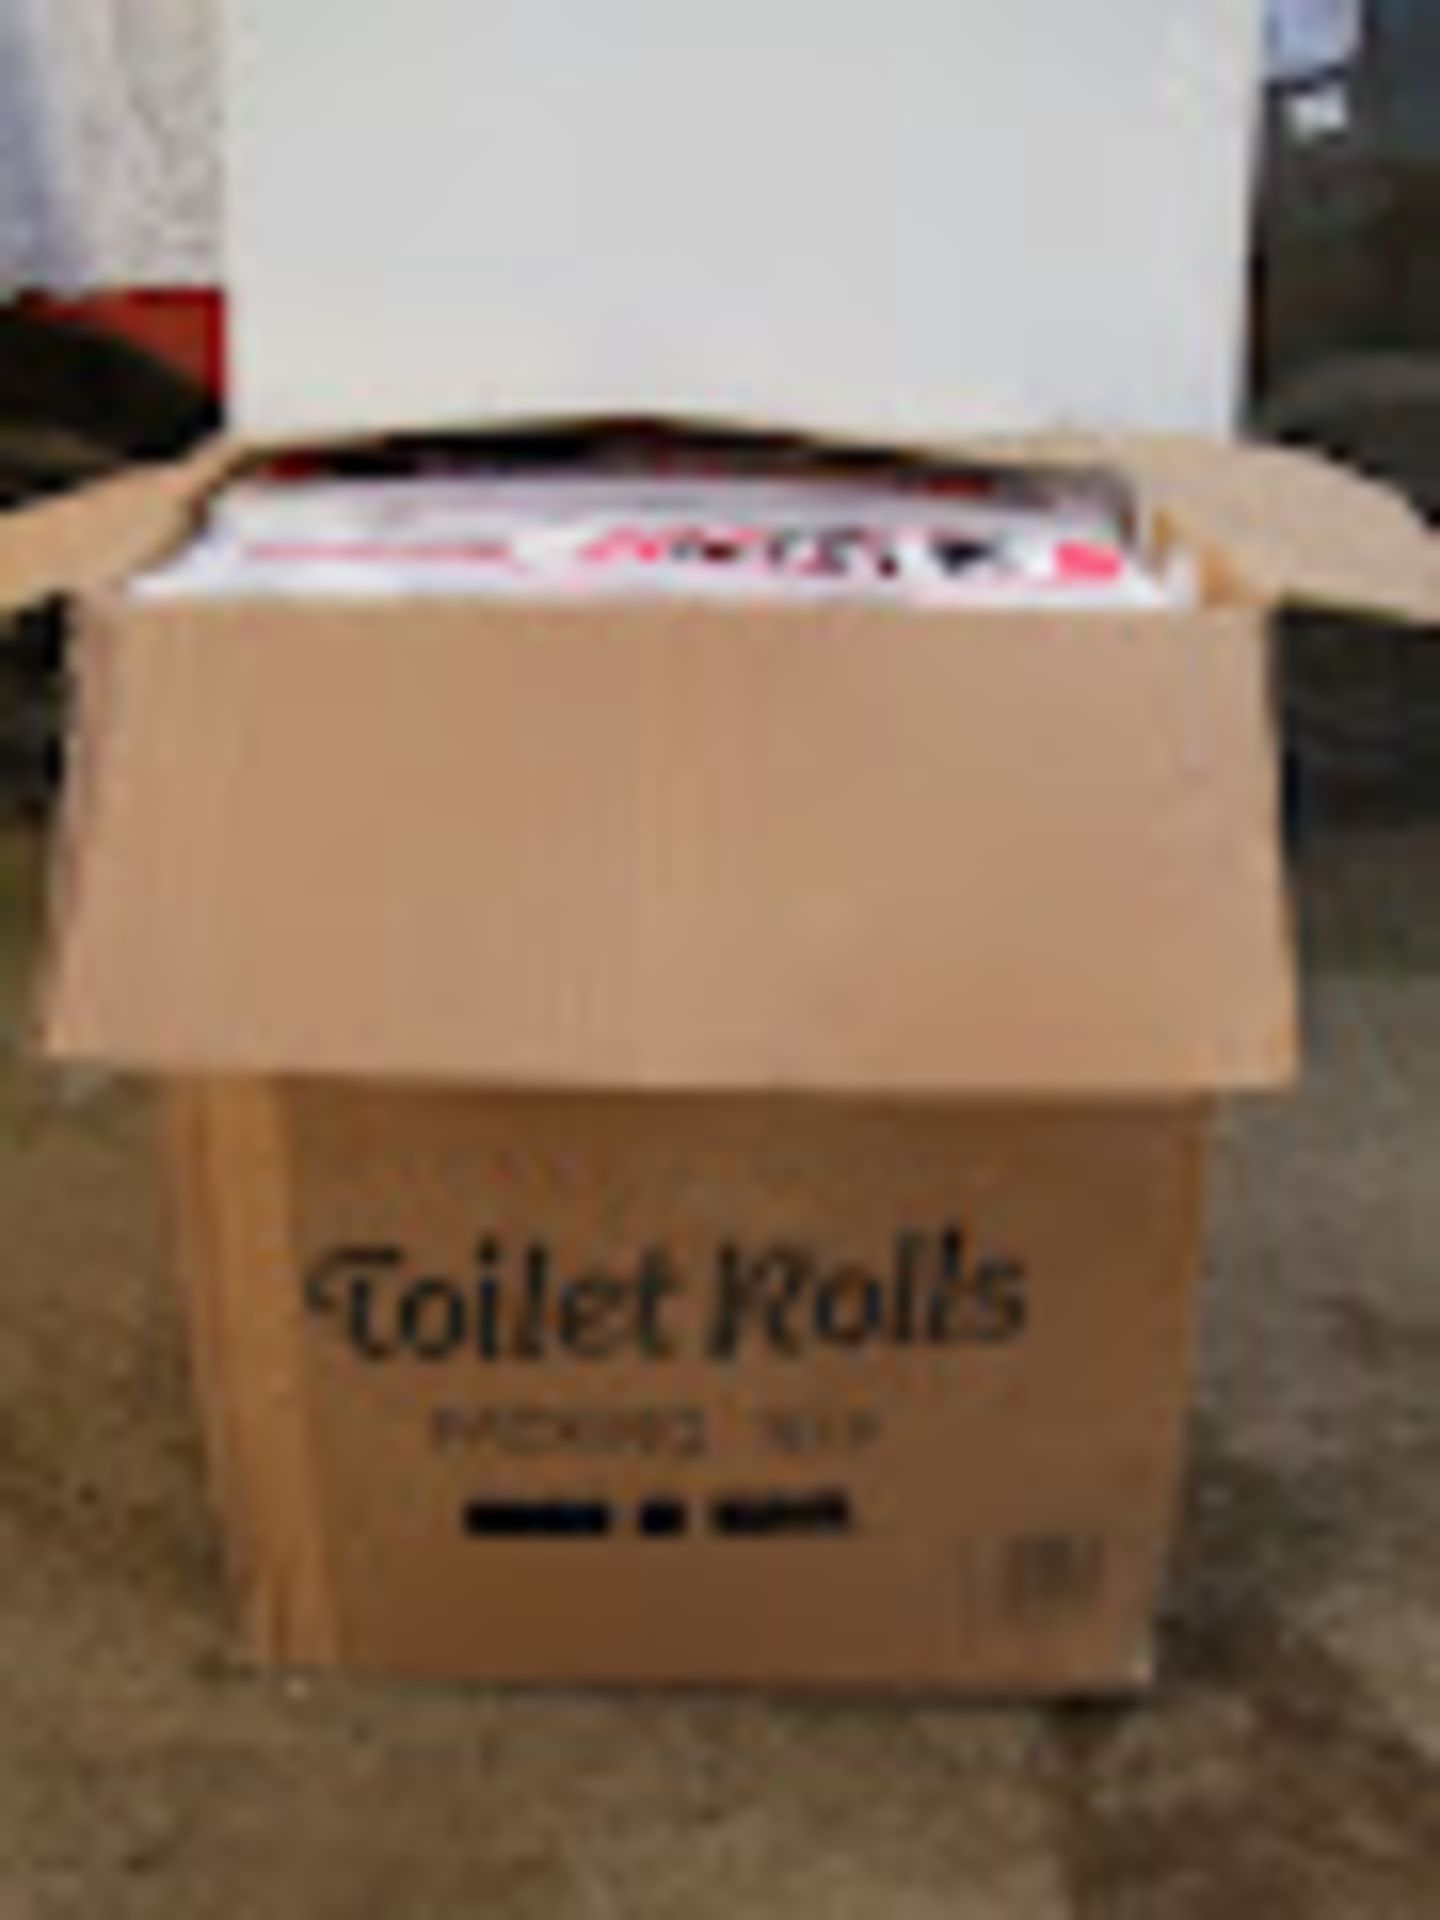 1 PALLET OF 2000 SUPERSOFT AND ABSORBENT TOILET ROLLS, IN PACKS OF 10, 20 CASES PER PALLET *PLUS VAT - Image 2 of 3